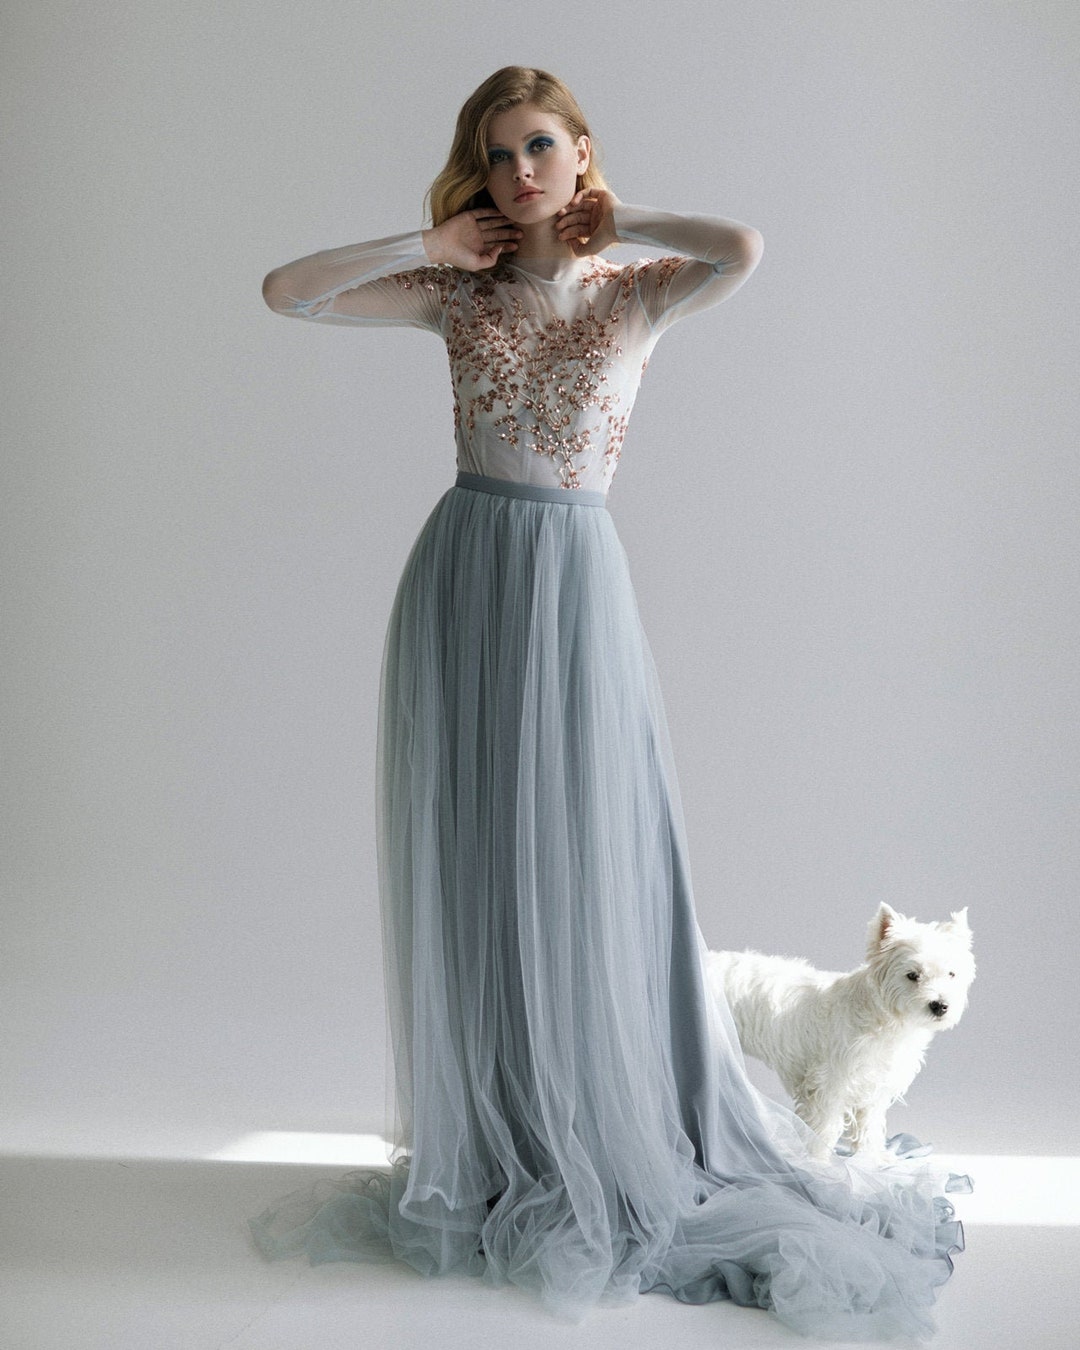 Pale Blue Tulle Wedding Dress / Hand Embroidered Wedding Gown / Corset ...